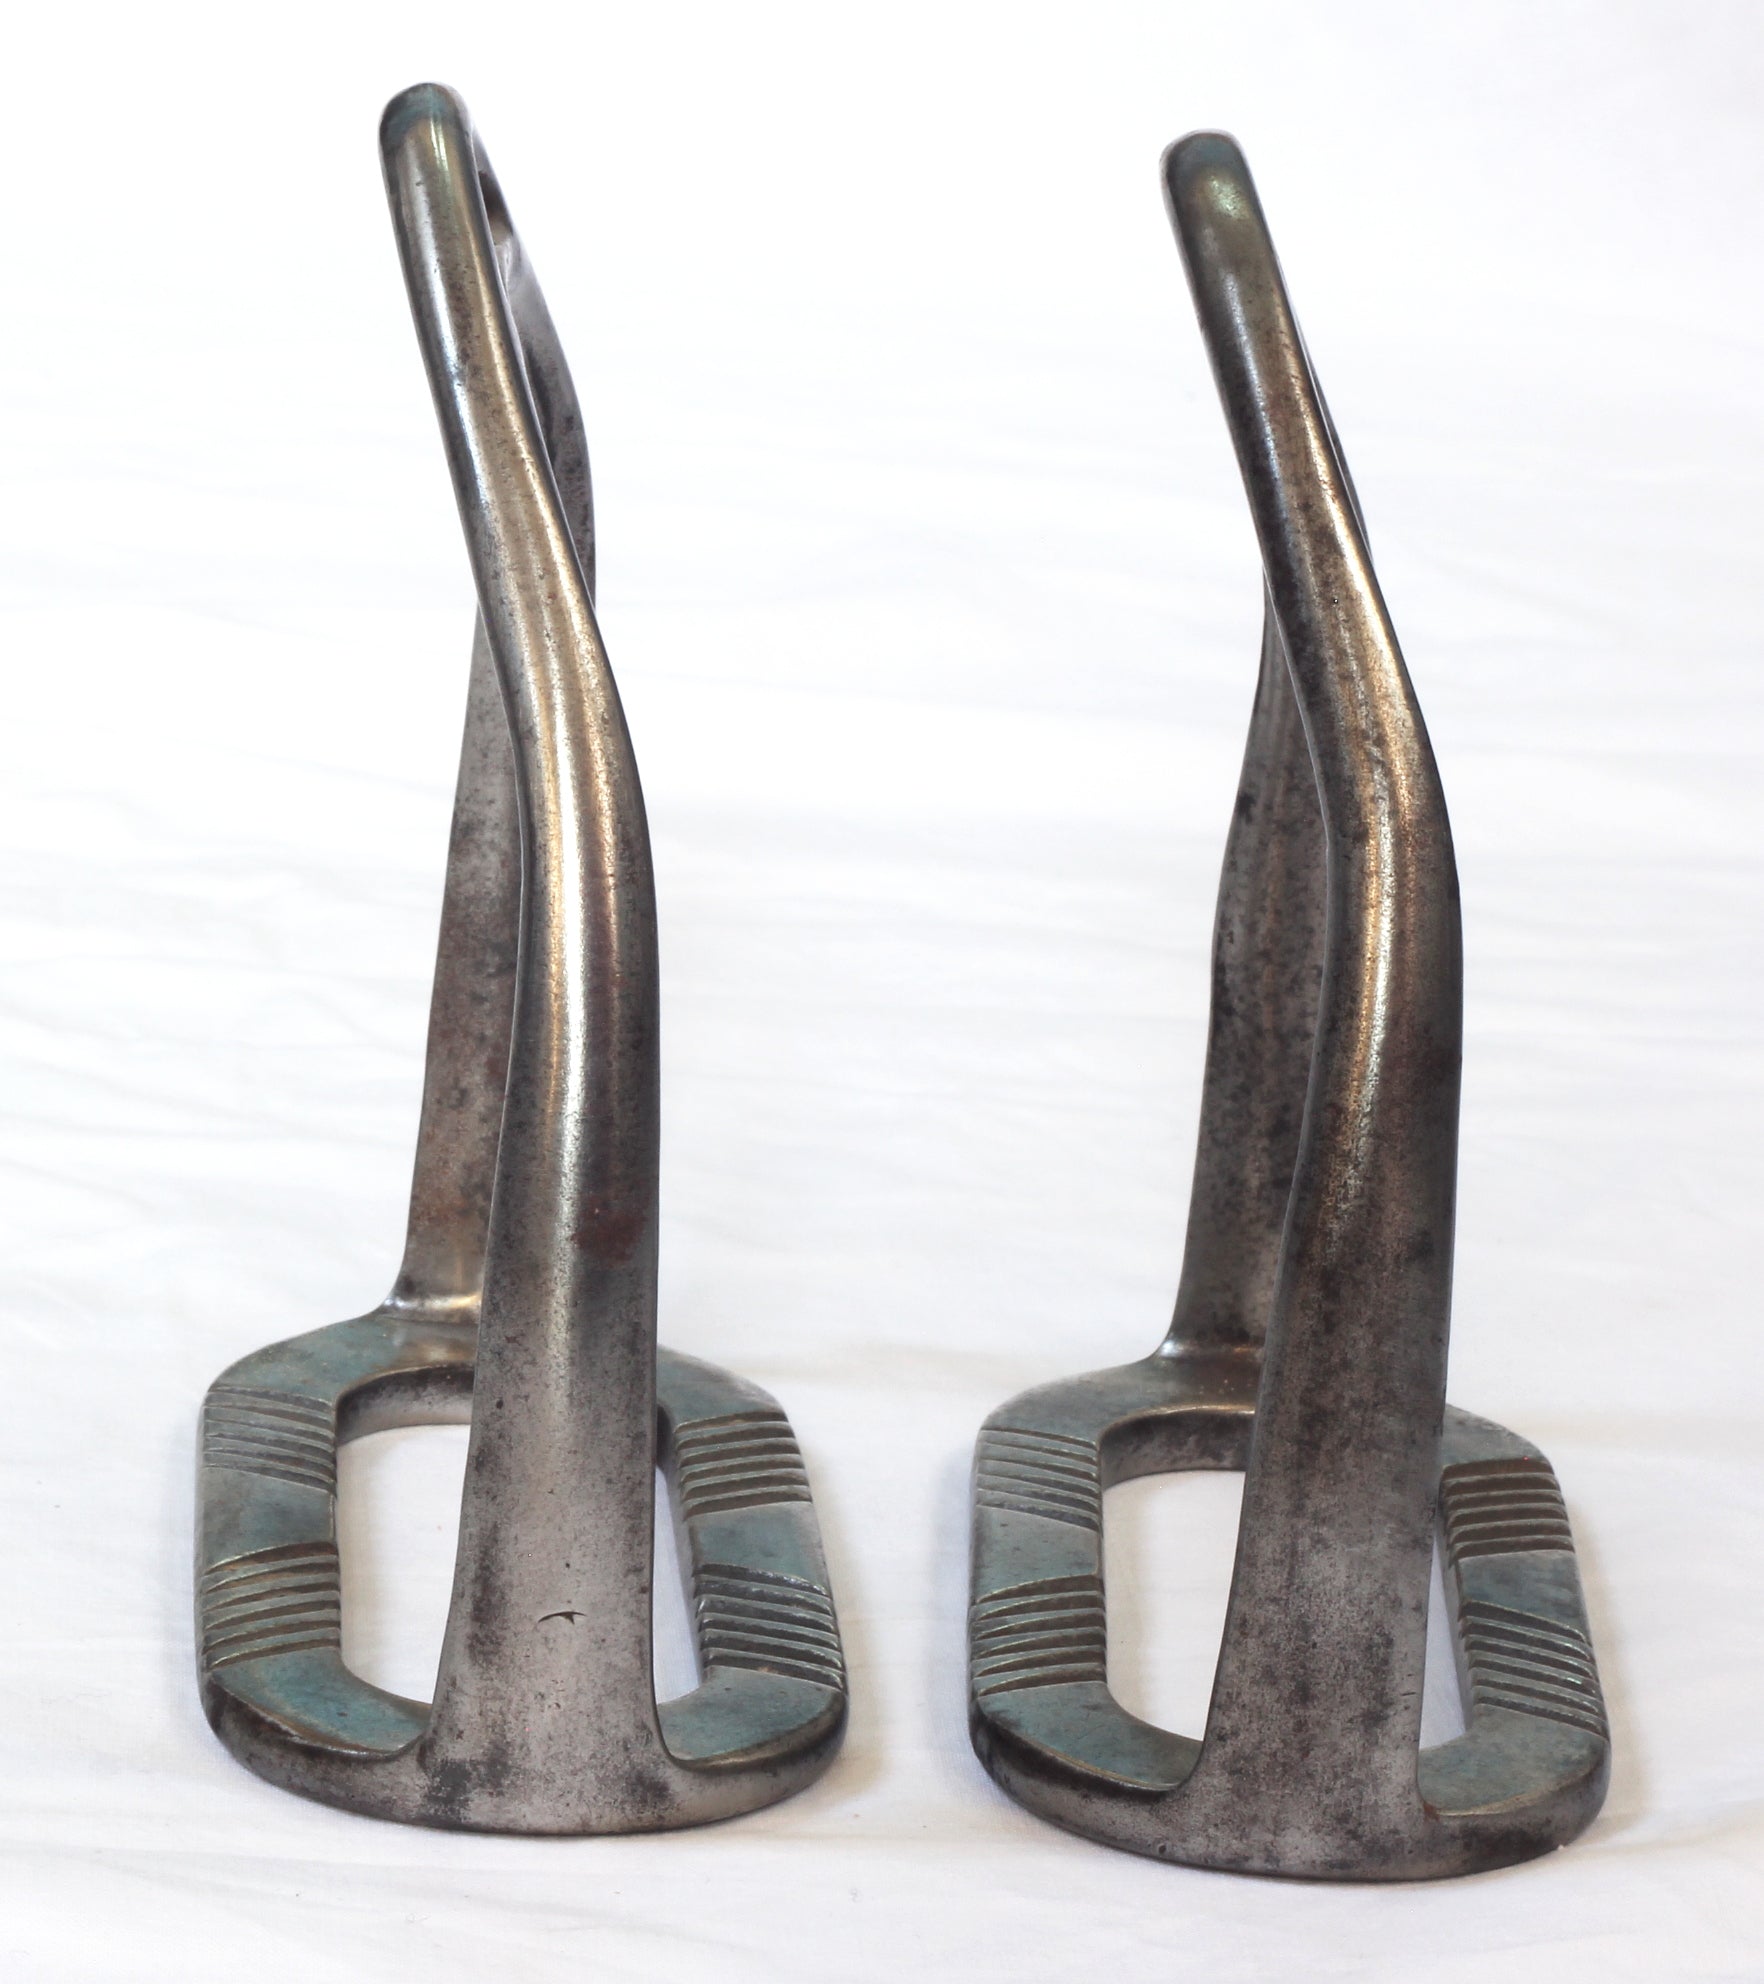 A Pair of 1915 WWI Military Stirrups